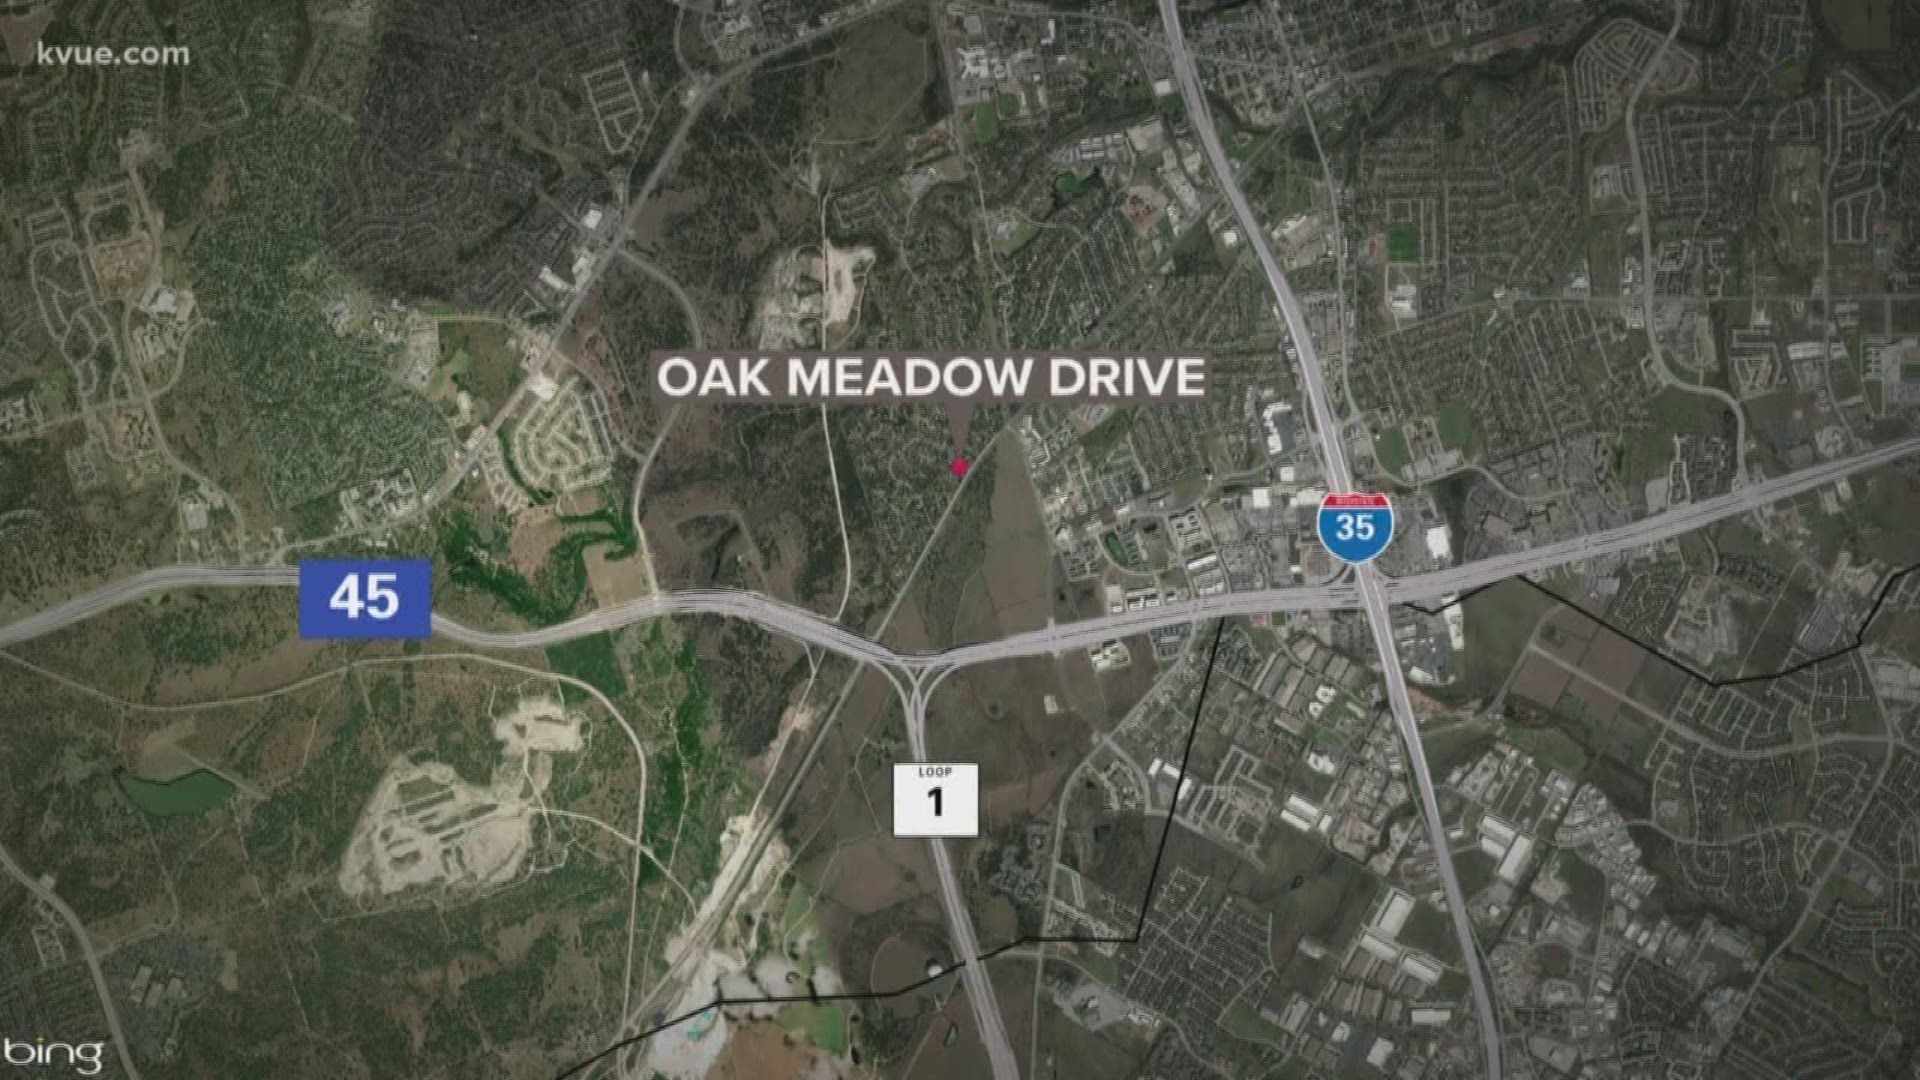 The fire happened just after 3:15 a.m. Friday near Oak Meadow Drive and McNeil Drive.